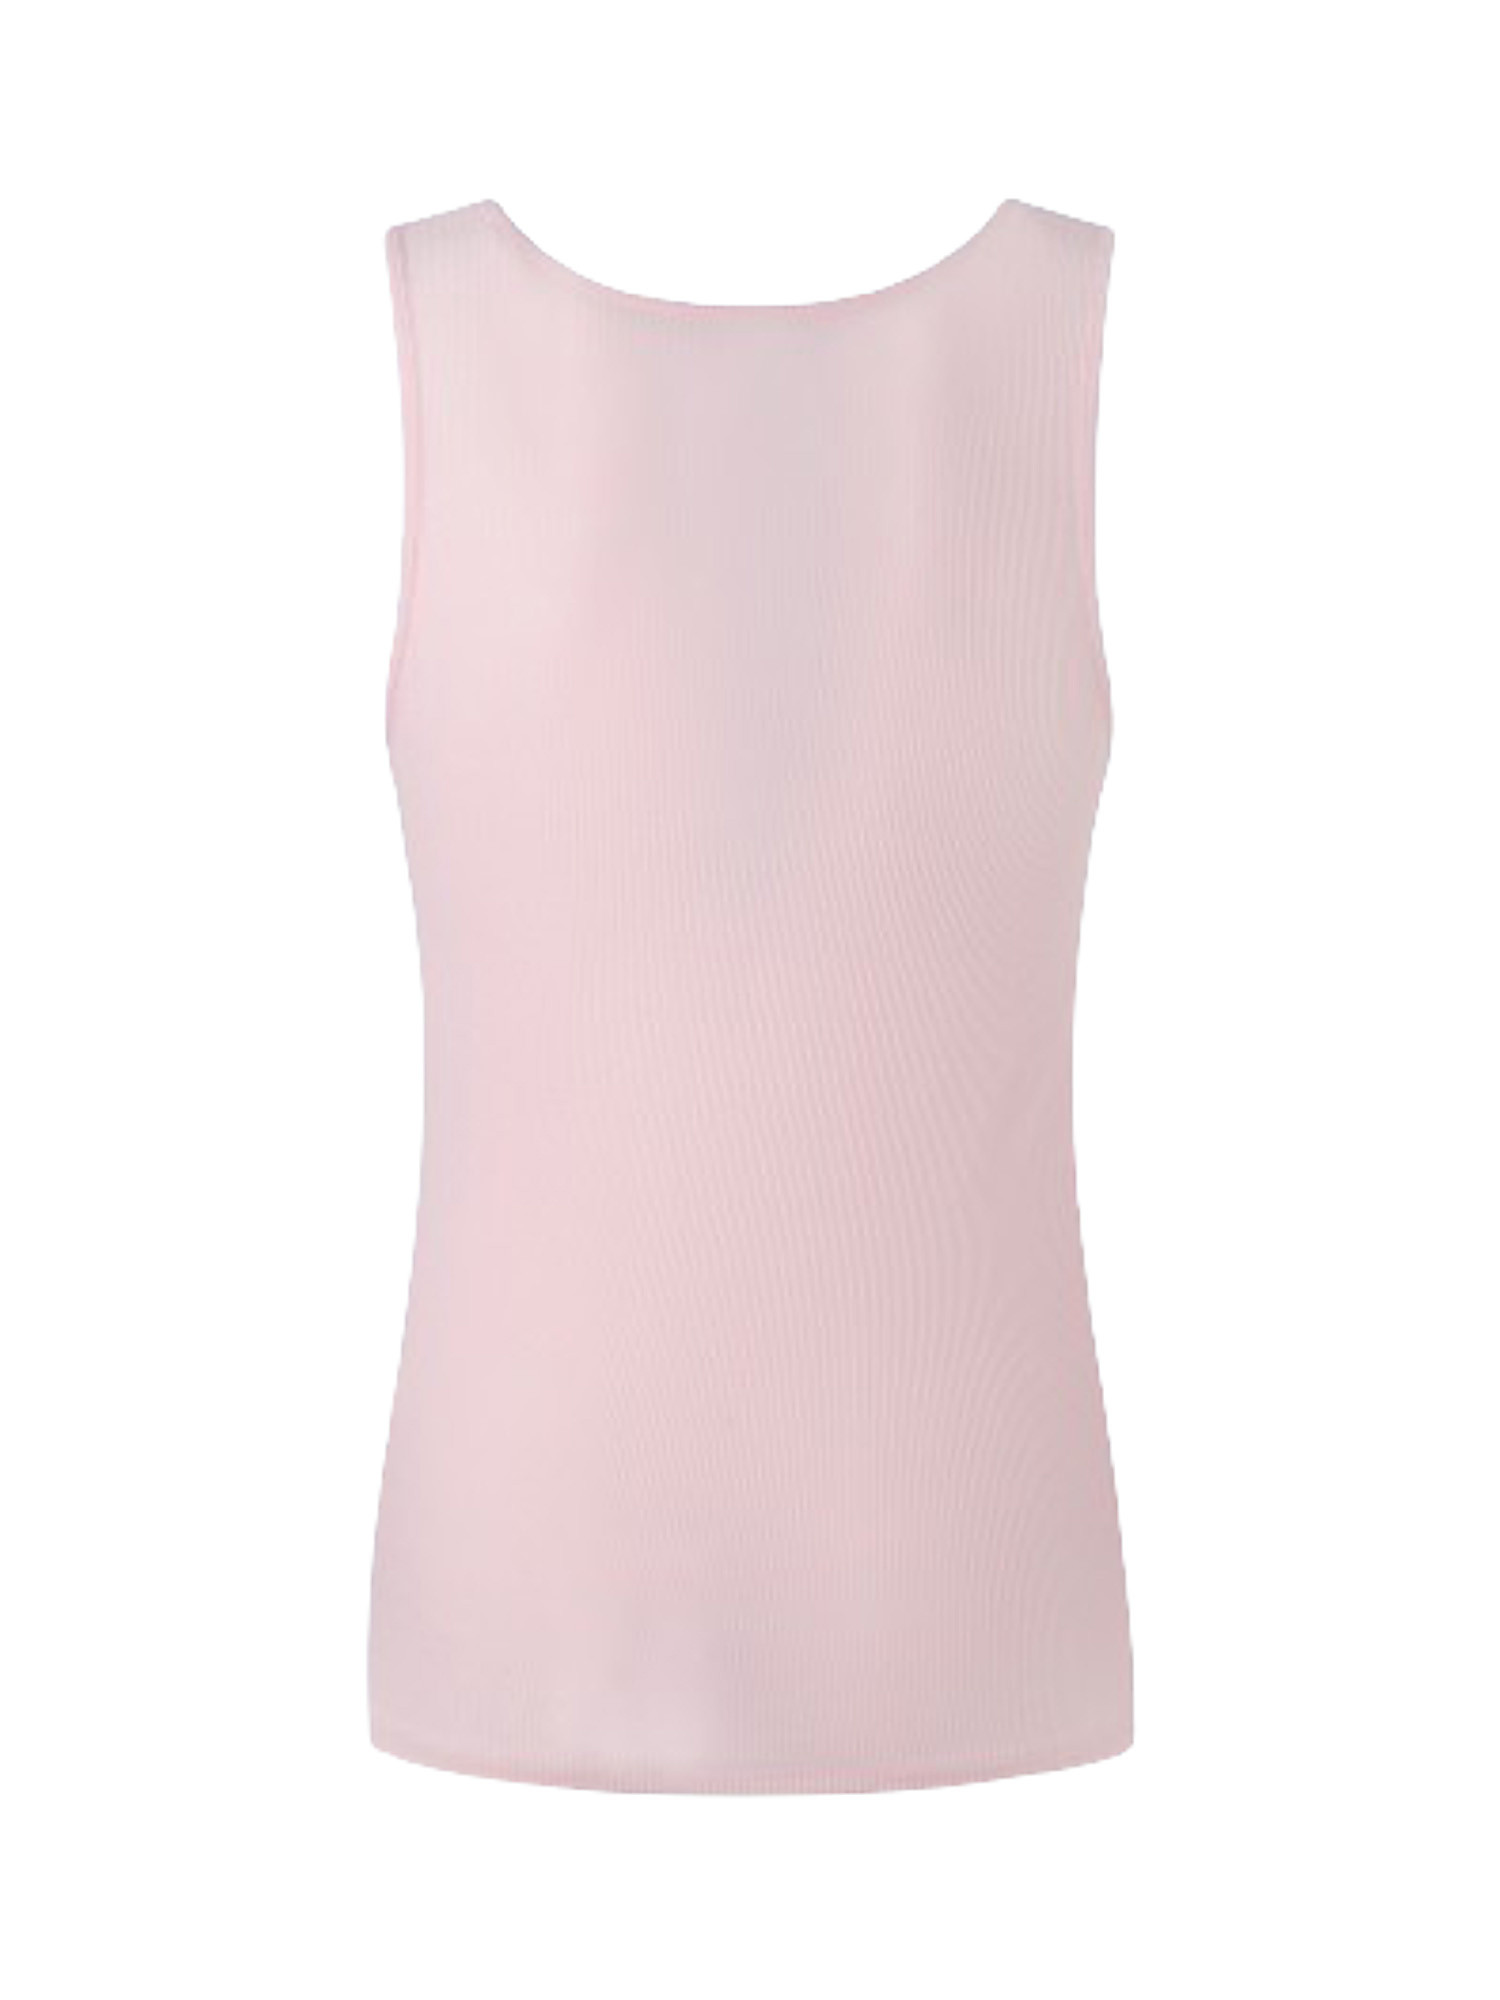 Dunia n thick strap top, Pink, large image number 1